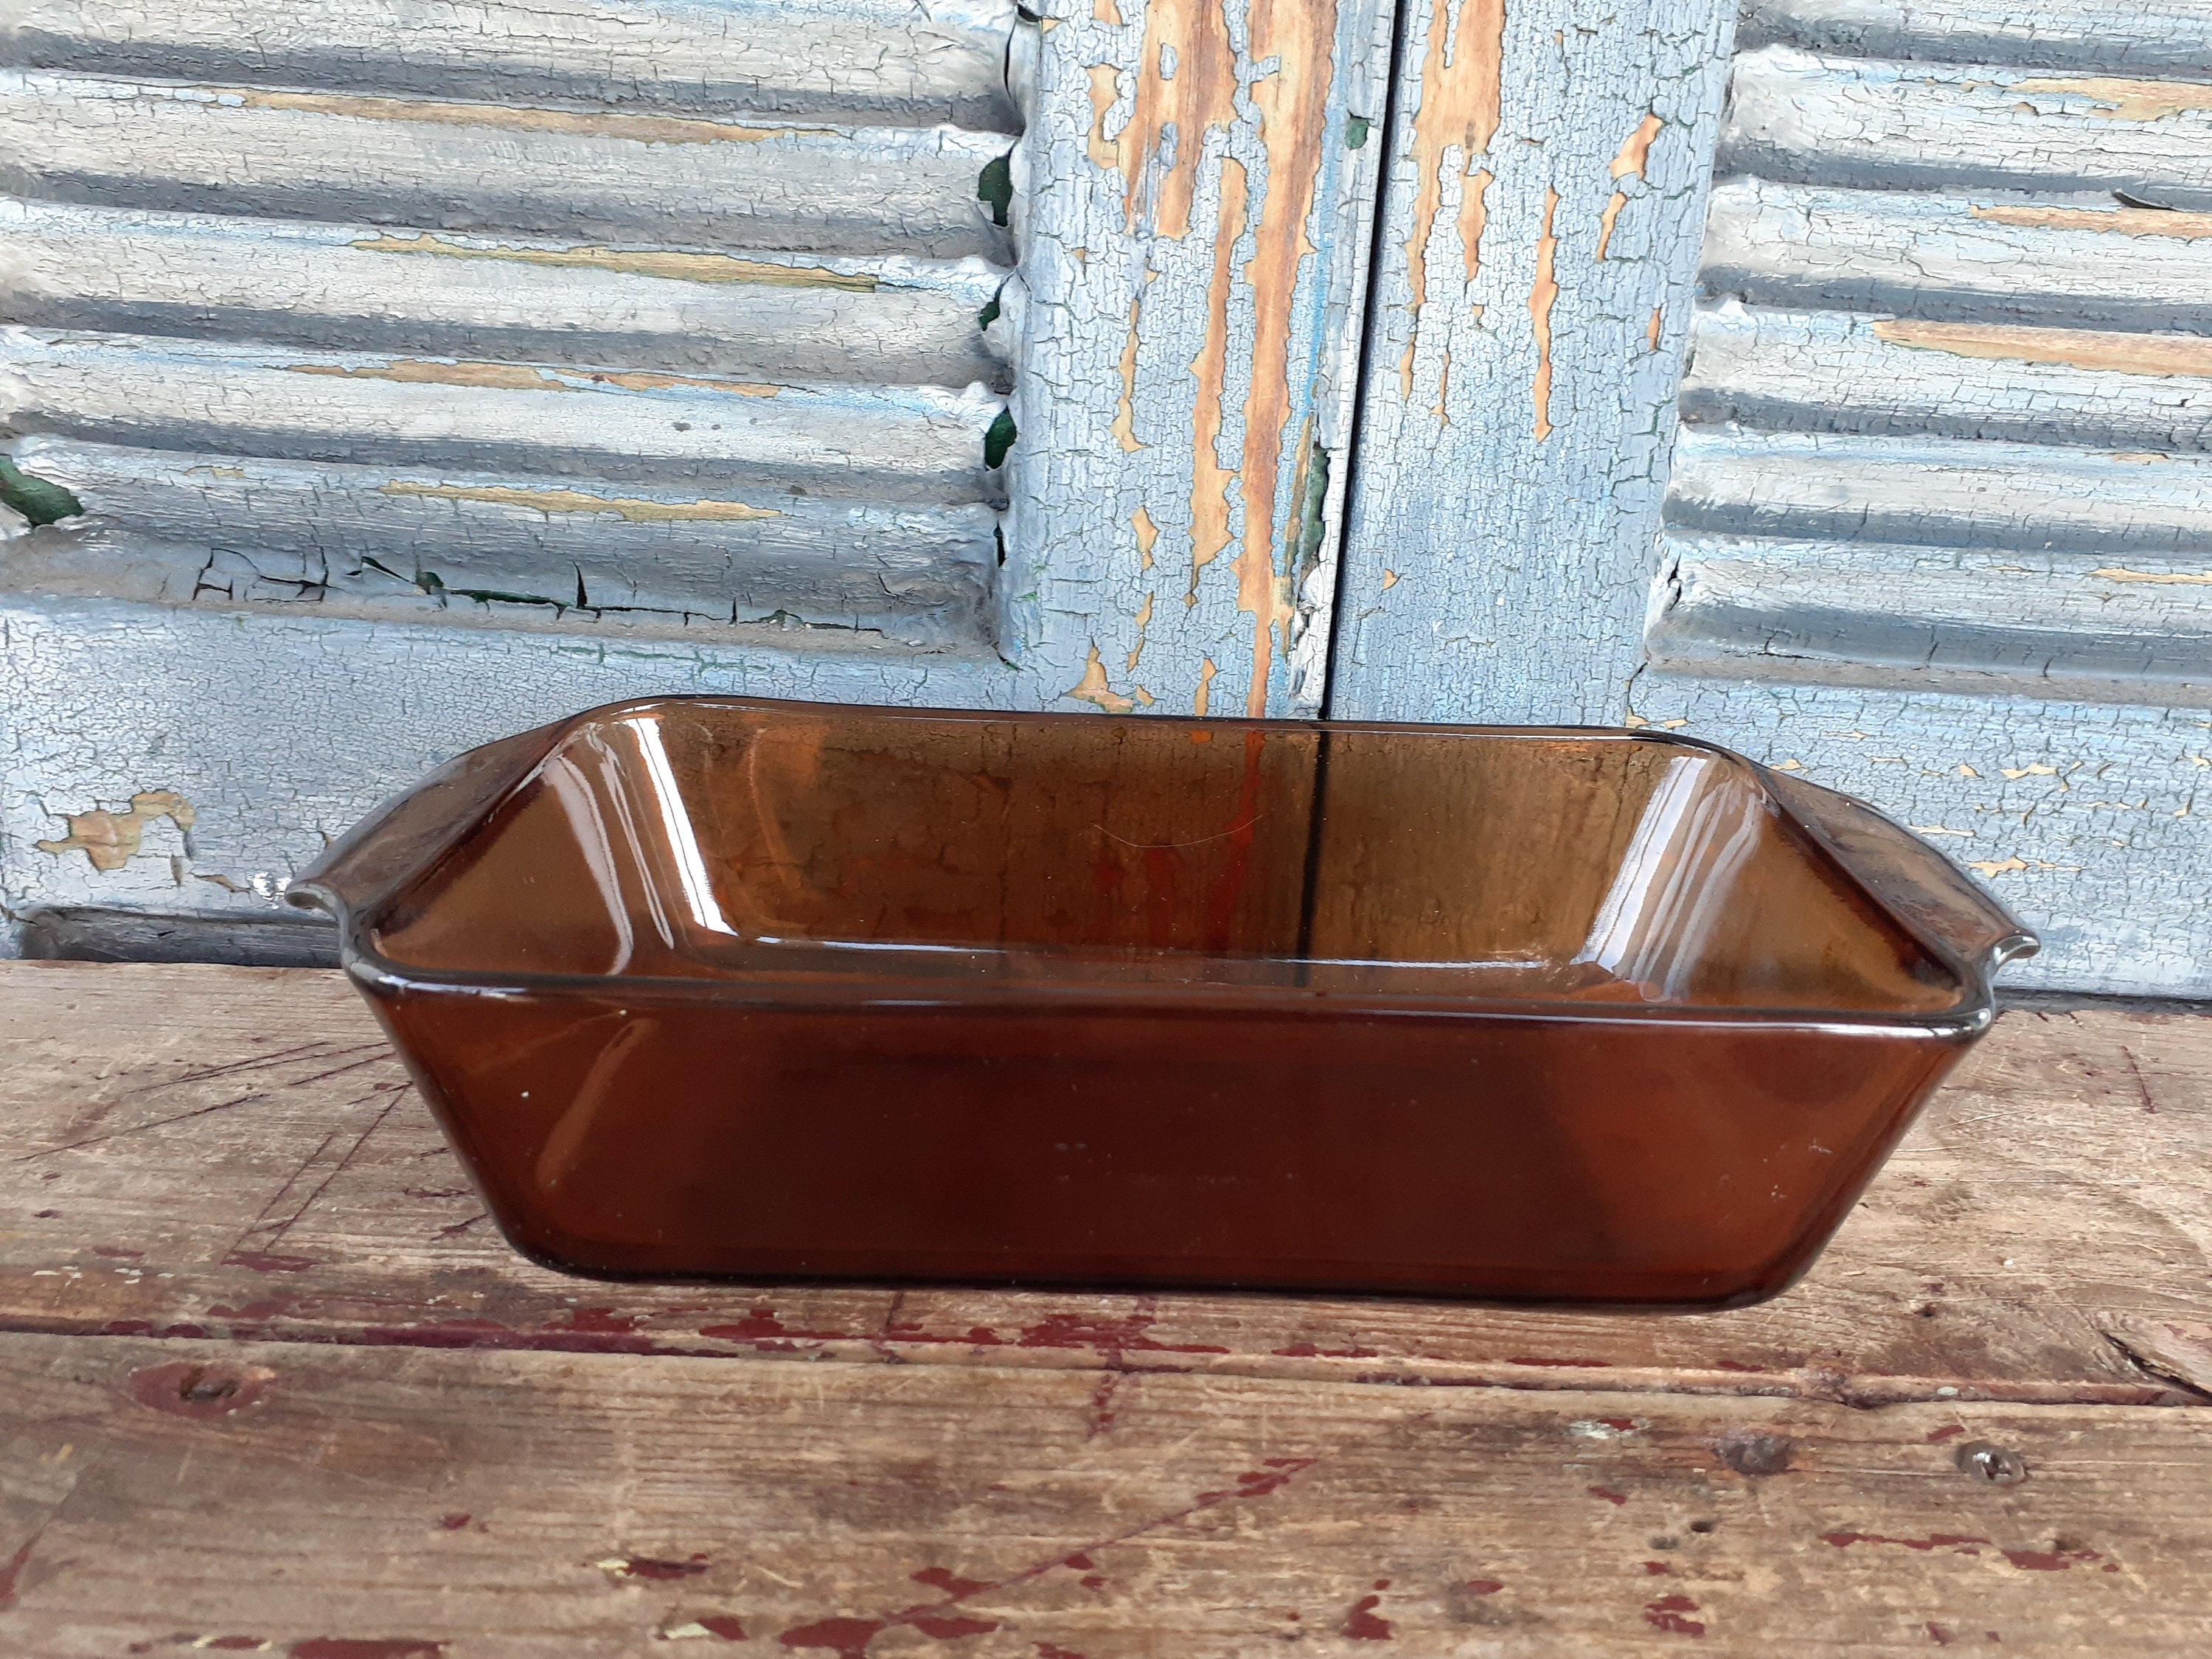 Vintage 1940s to 1960s Small Worthmore Aluminum Loaf Baking Pan